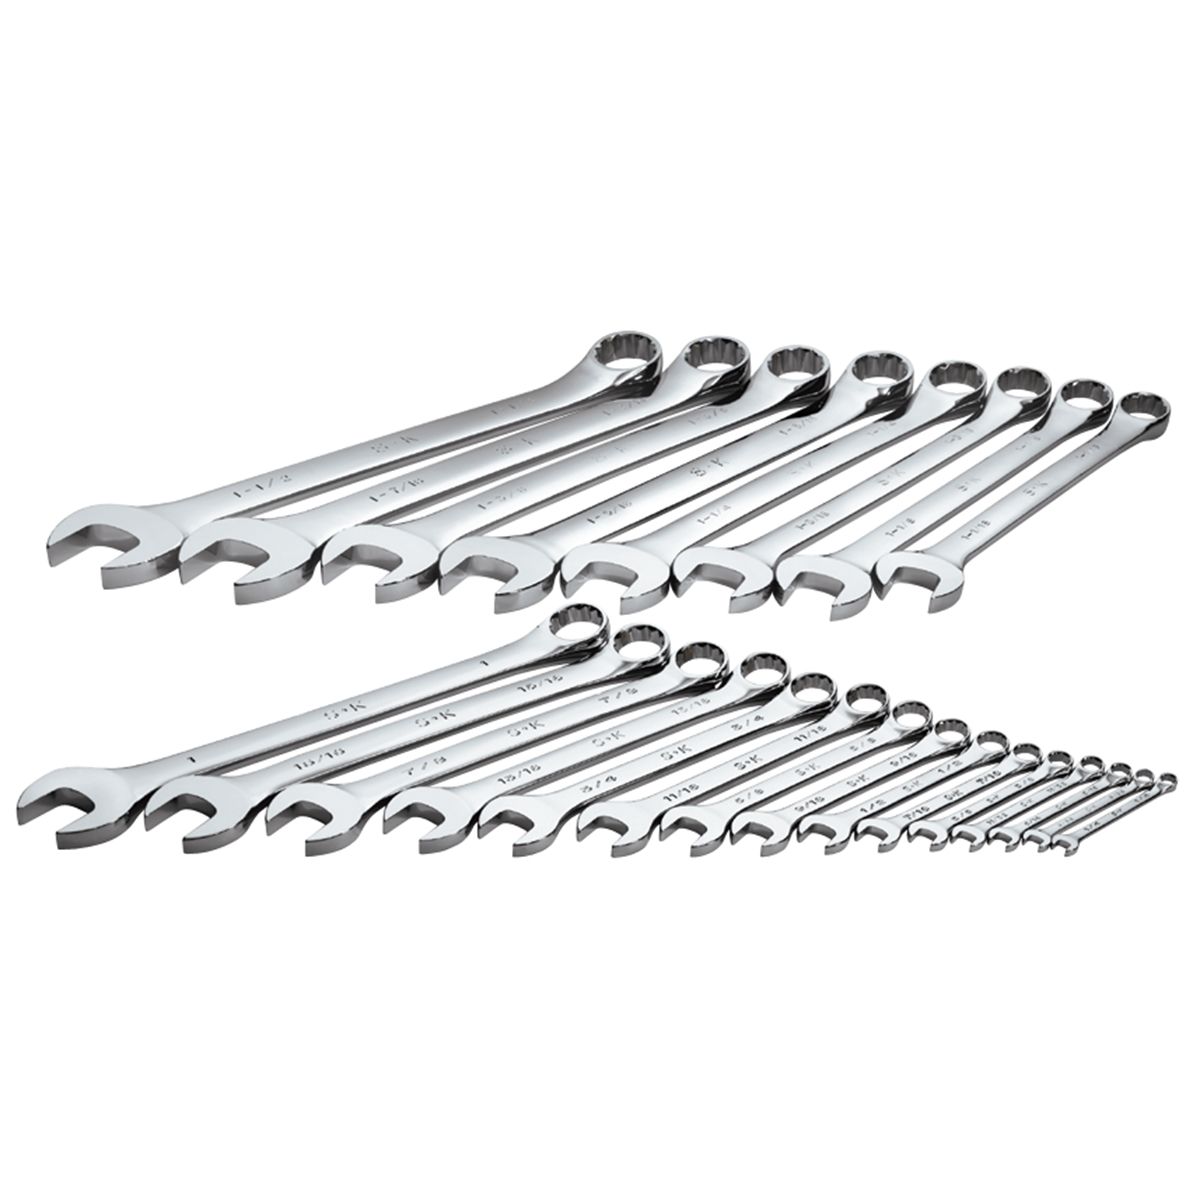 SuperKrome Fractional Combination Wrench Set - 23-...